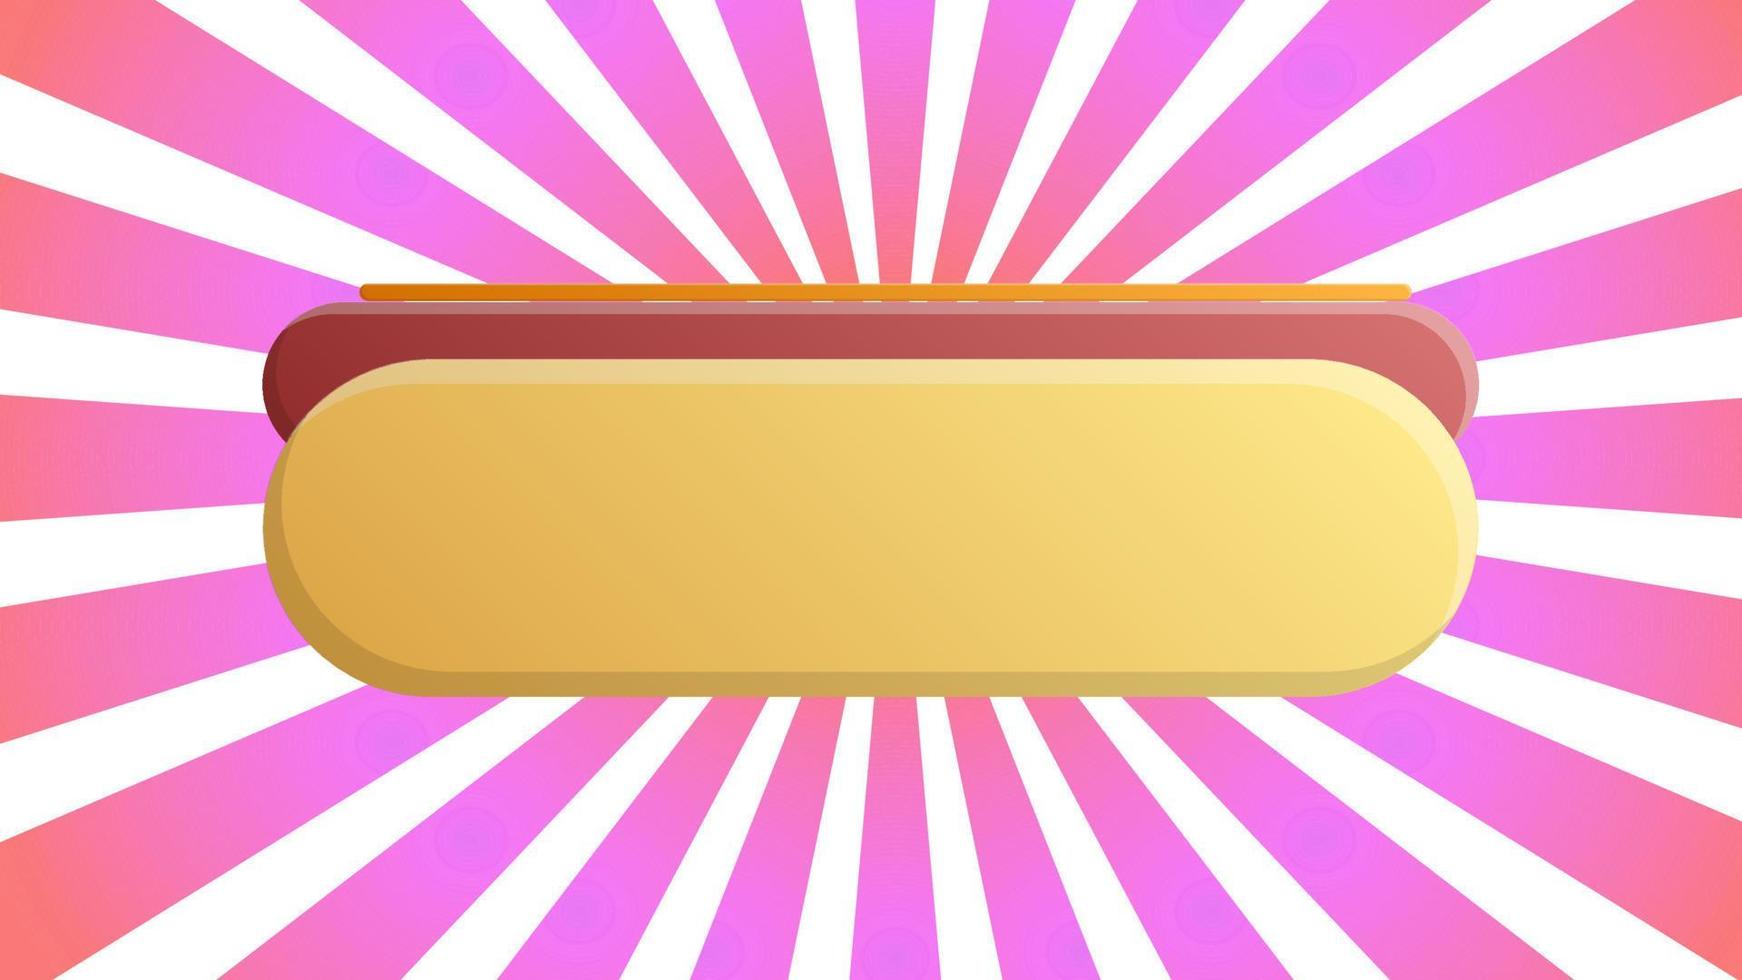 sandwich on white and pink, retro background, vector illustration. bun with meat, hearty filling, unhealthy snack. food truck sandwich. food for lunch, hearty high-calorie lunch